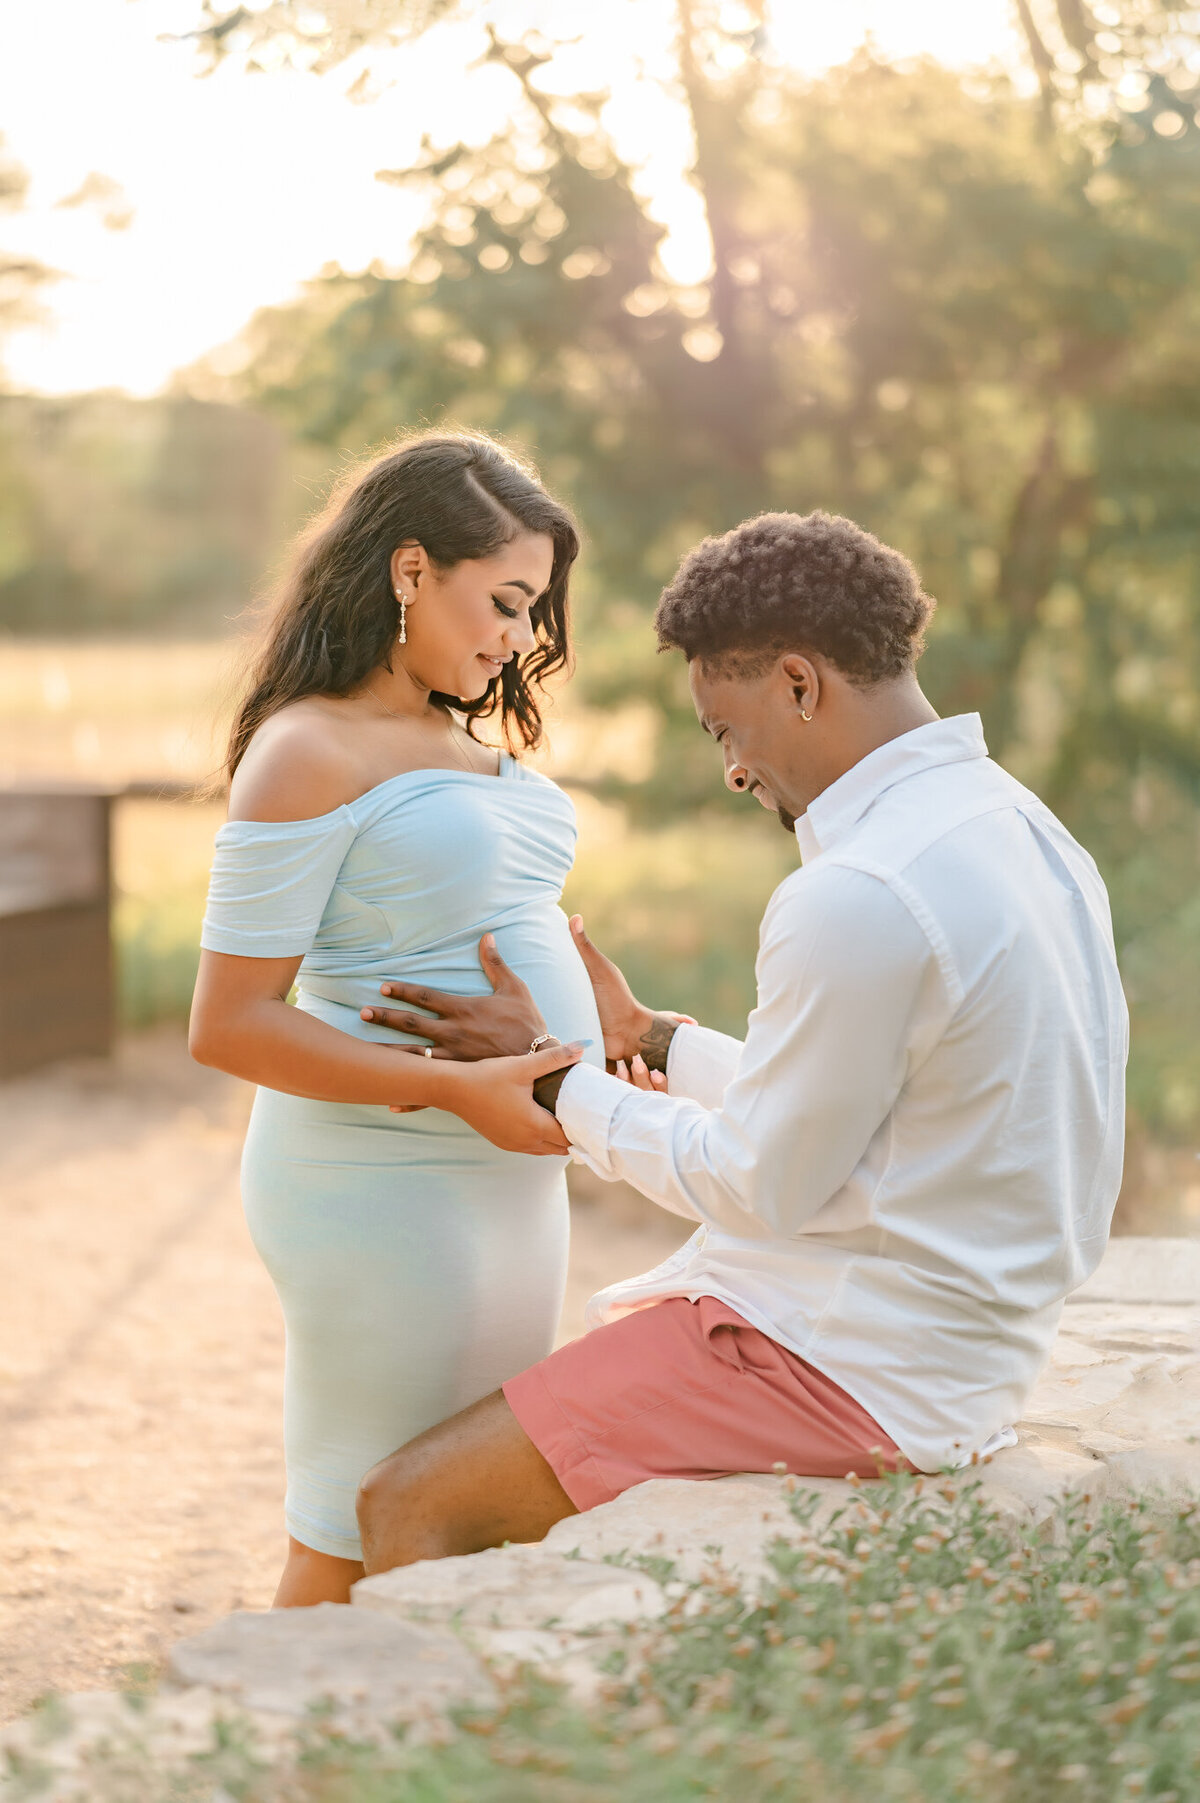 Expecting couple with hands on mama's belly in beautiful glowing light during maternity pictures.